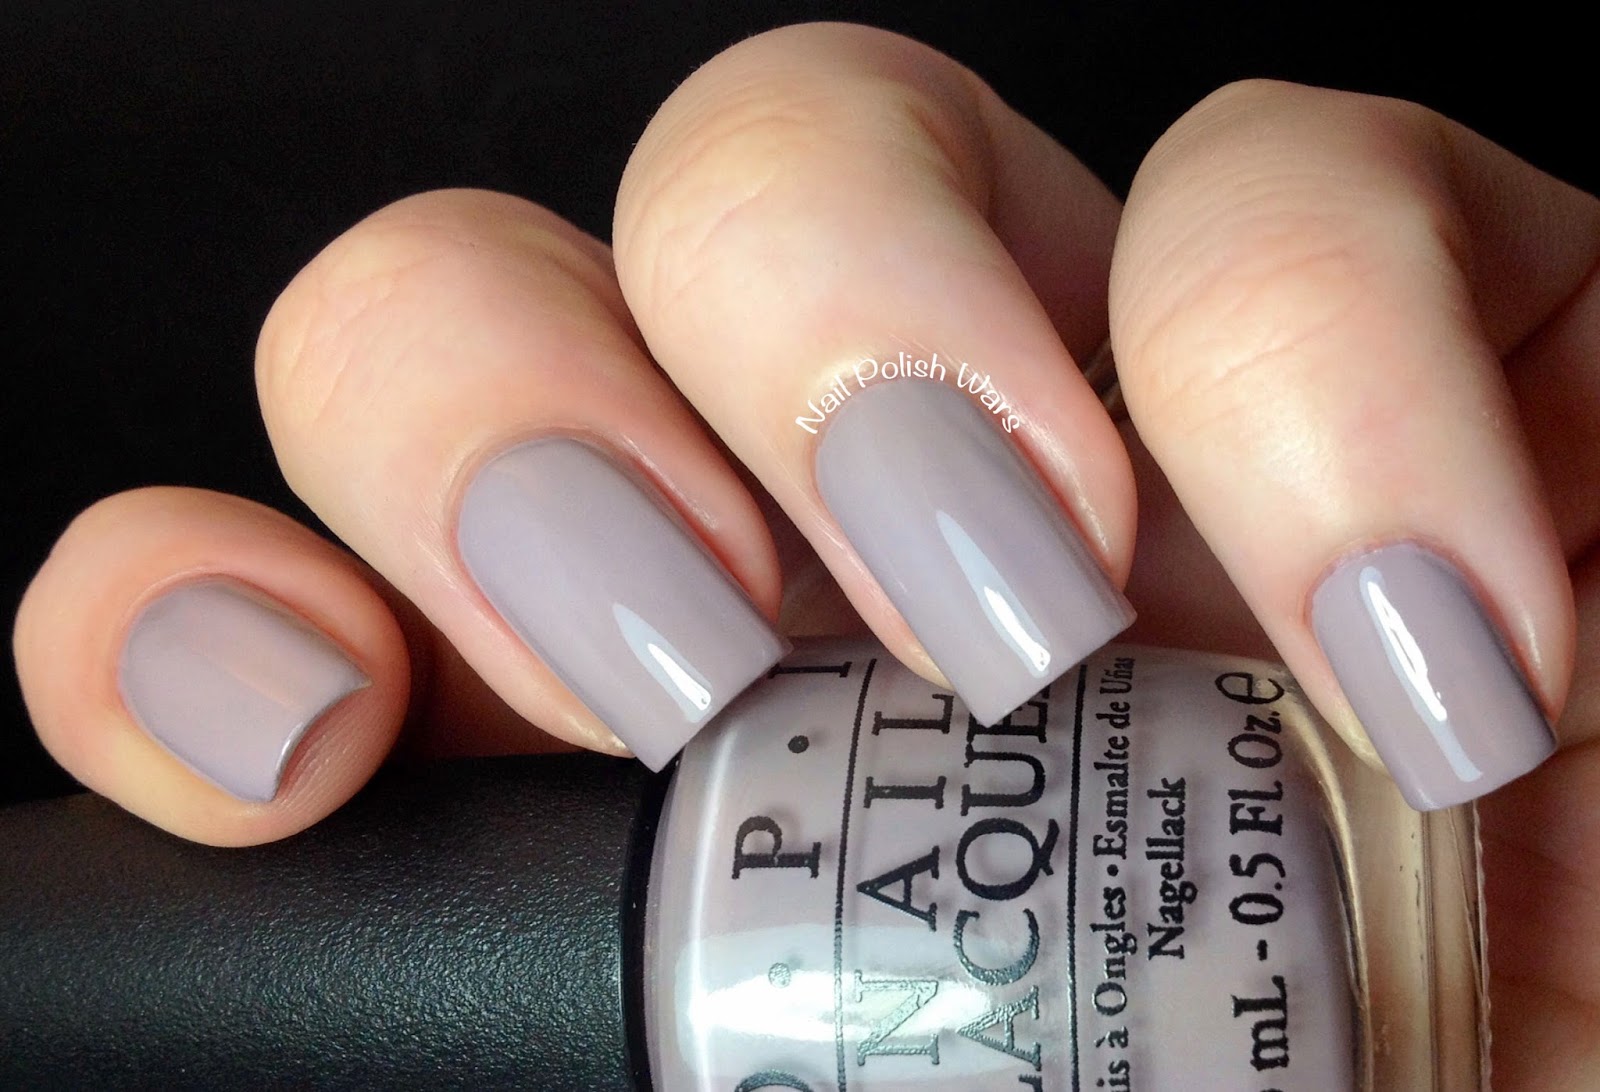 1. OPI Nail Lacquer in "Taupe-less Beach" - wide 4